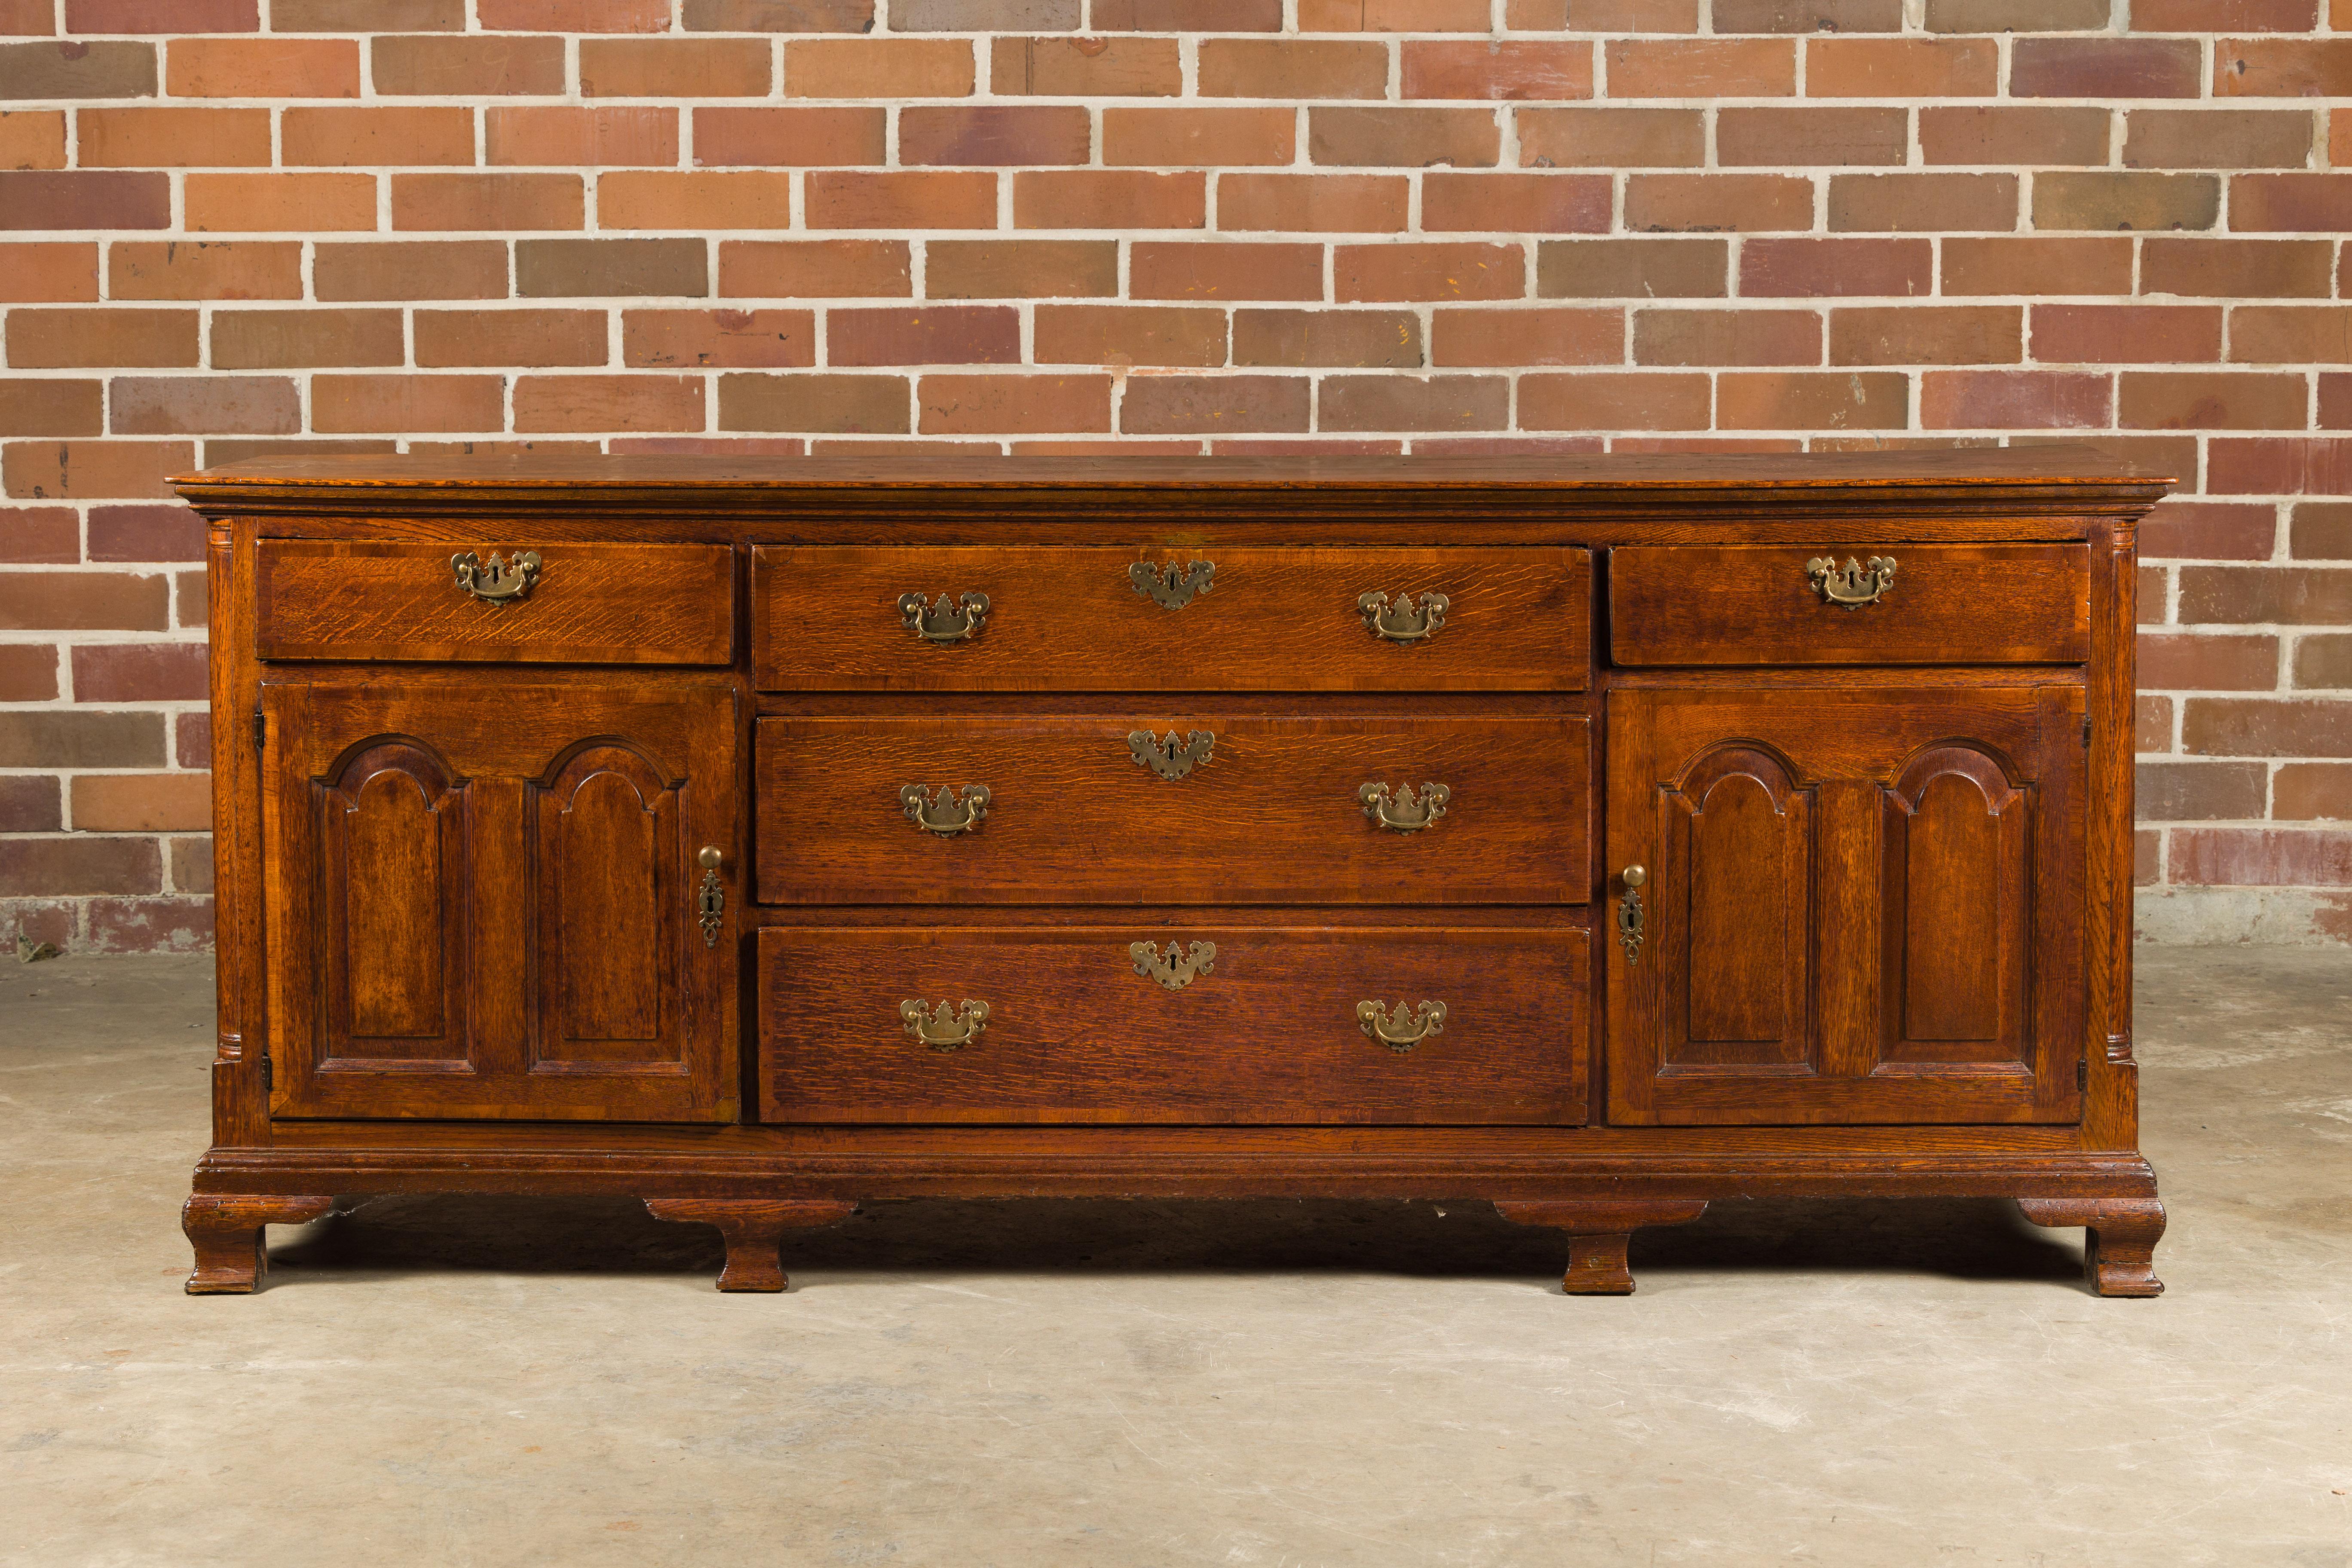 An English oak long buffet from the 19th century with five drawers, two doors, brass hardware and carved feet. Step back into the splendor of 19th-century England with this distinguished oak long buffet. Radiating undeniable antiquarian charm, its